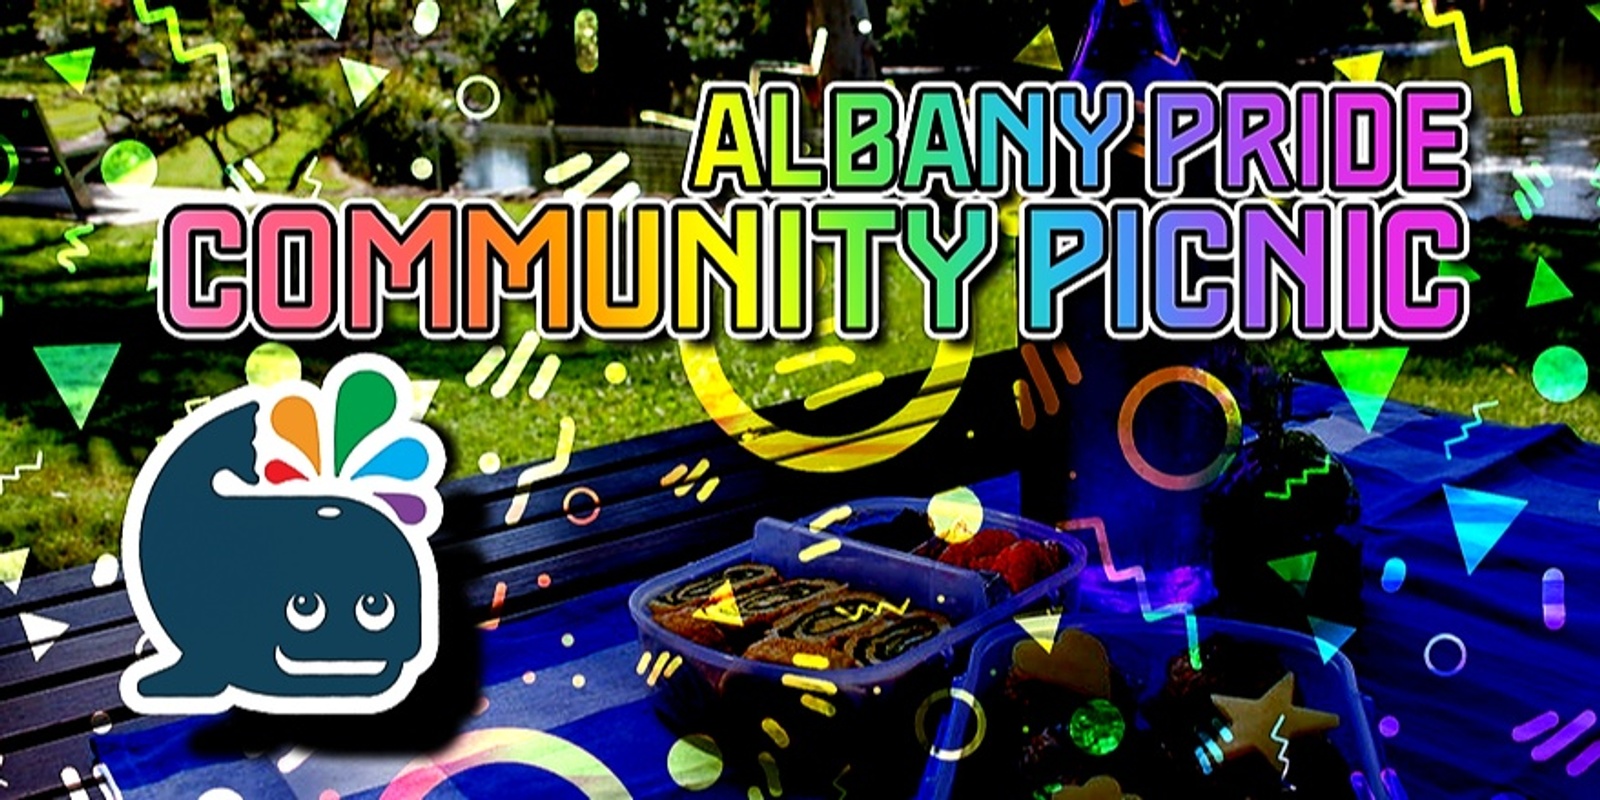 Banner image for Albany Pride Community Picnic